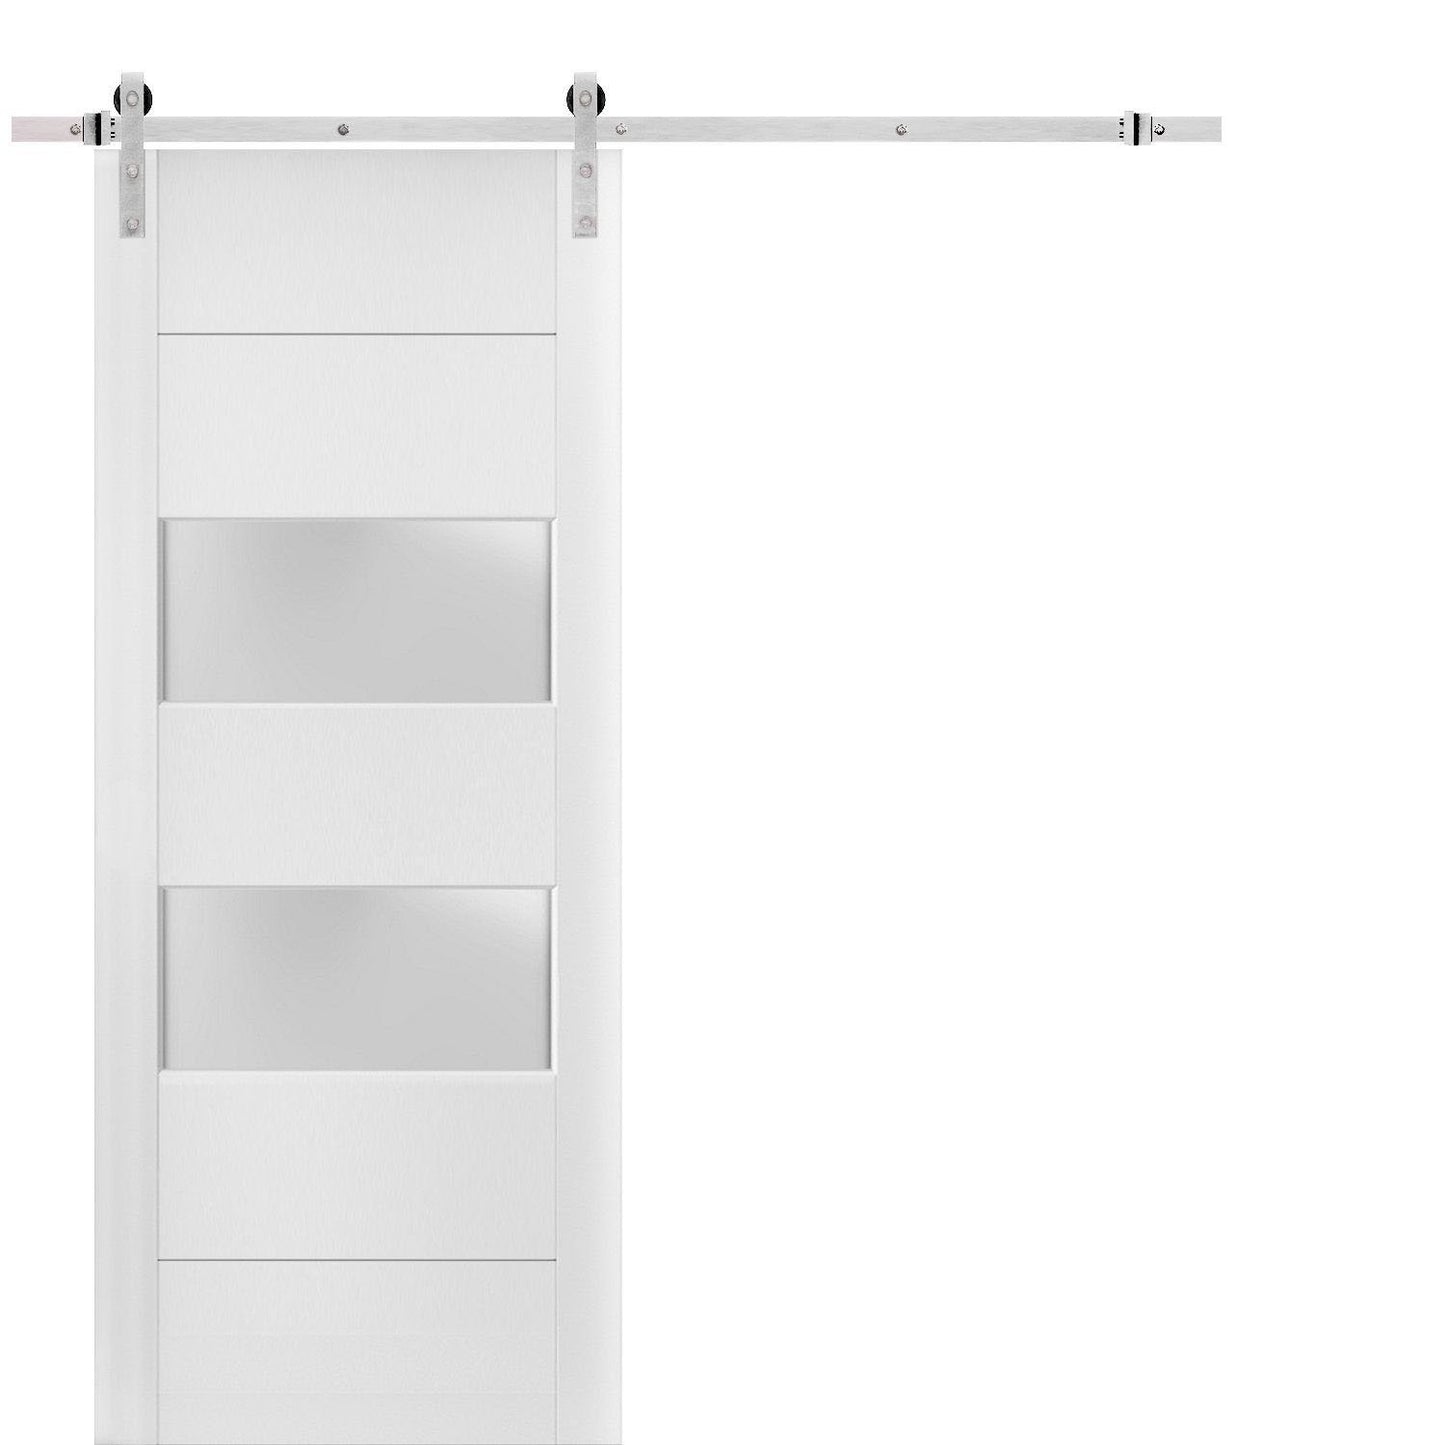 Lucia 4010 White Silk Barn Door with 2 Lites Frosted Glass and Stainless Rail